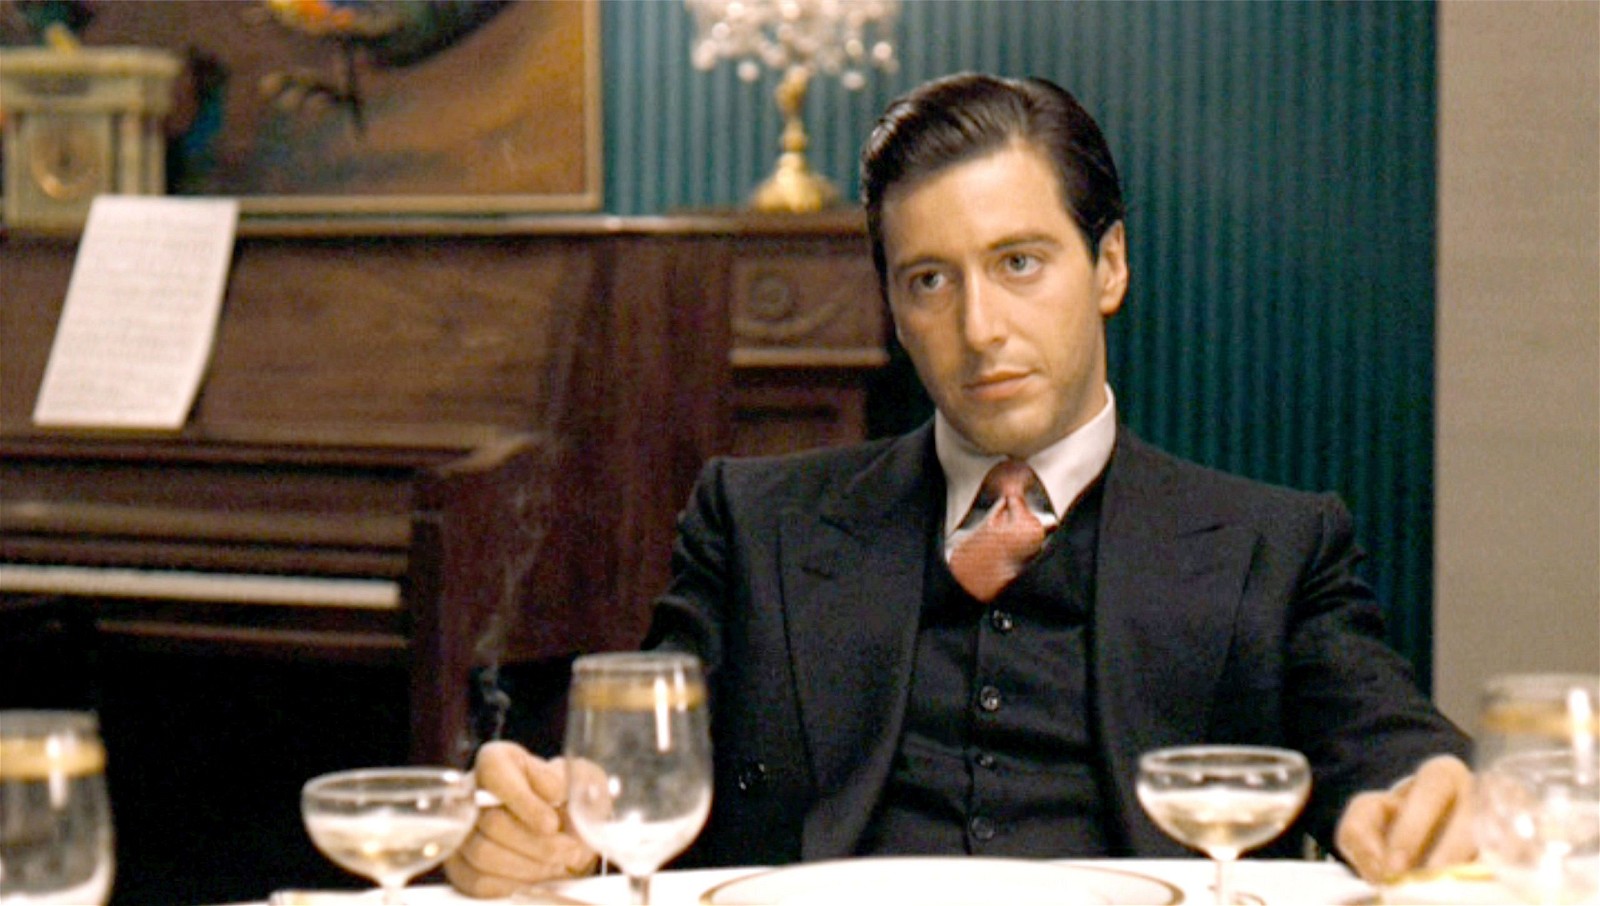 Al Pacino as Michael Corleone in a still from The Godfather